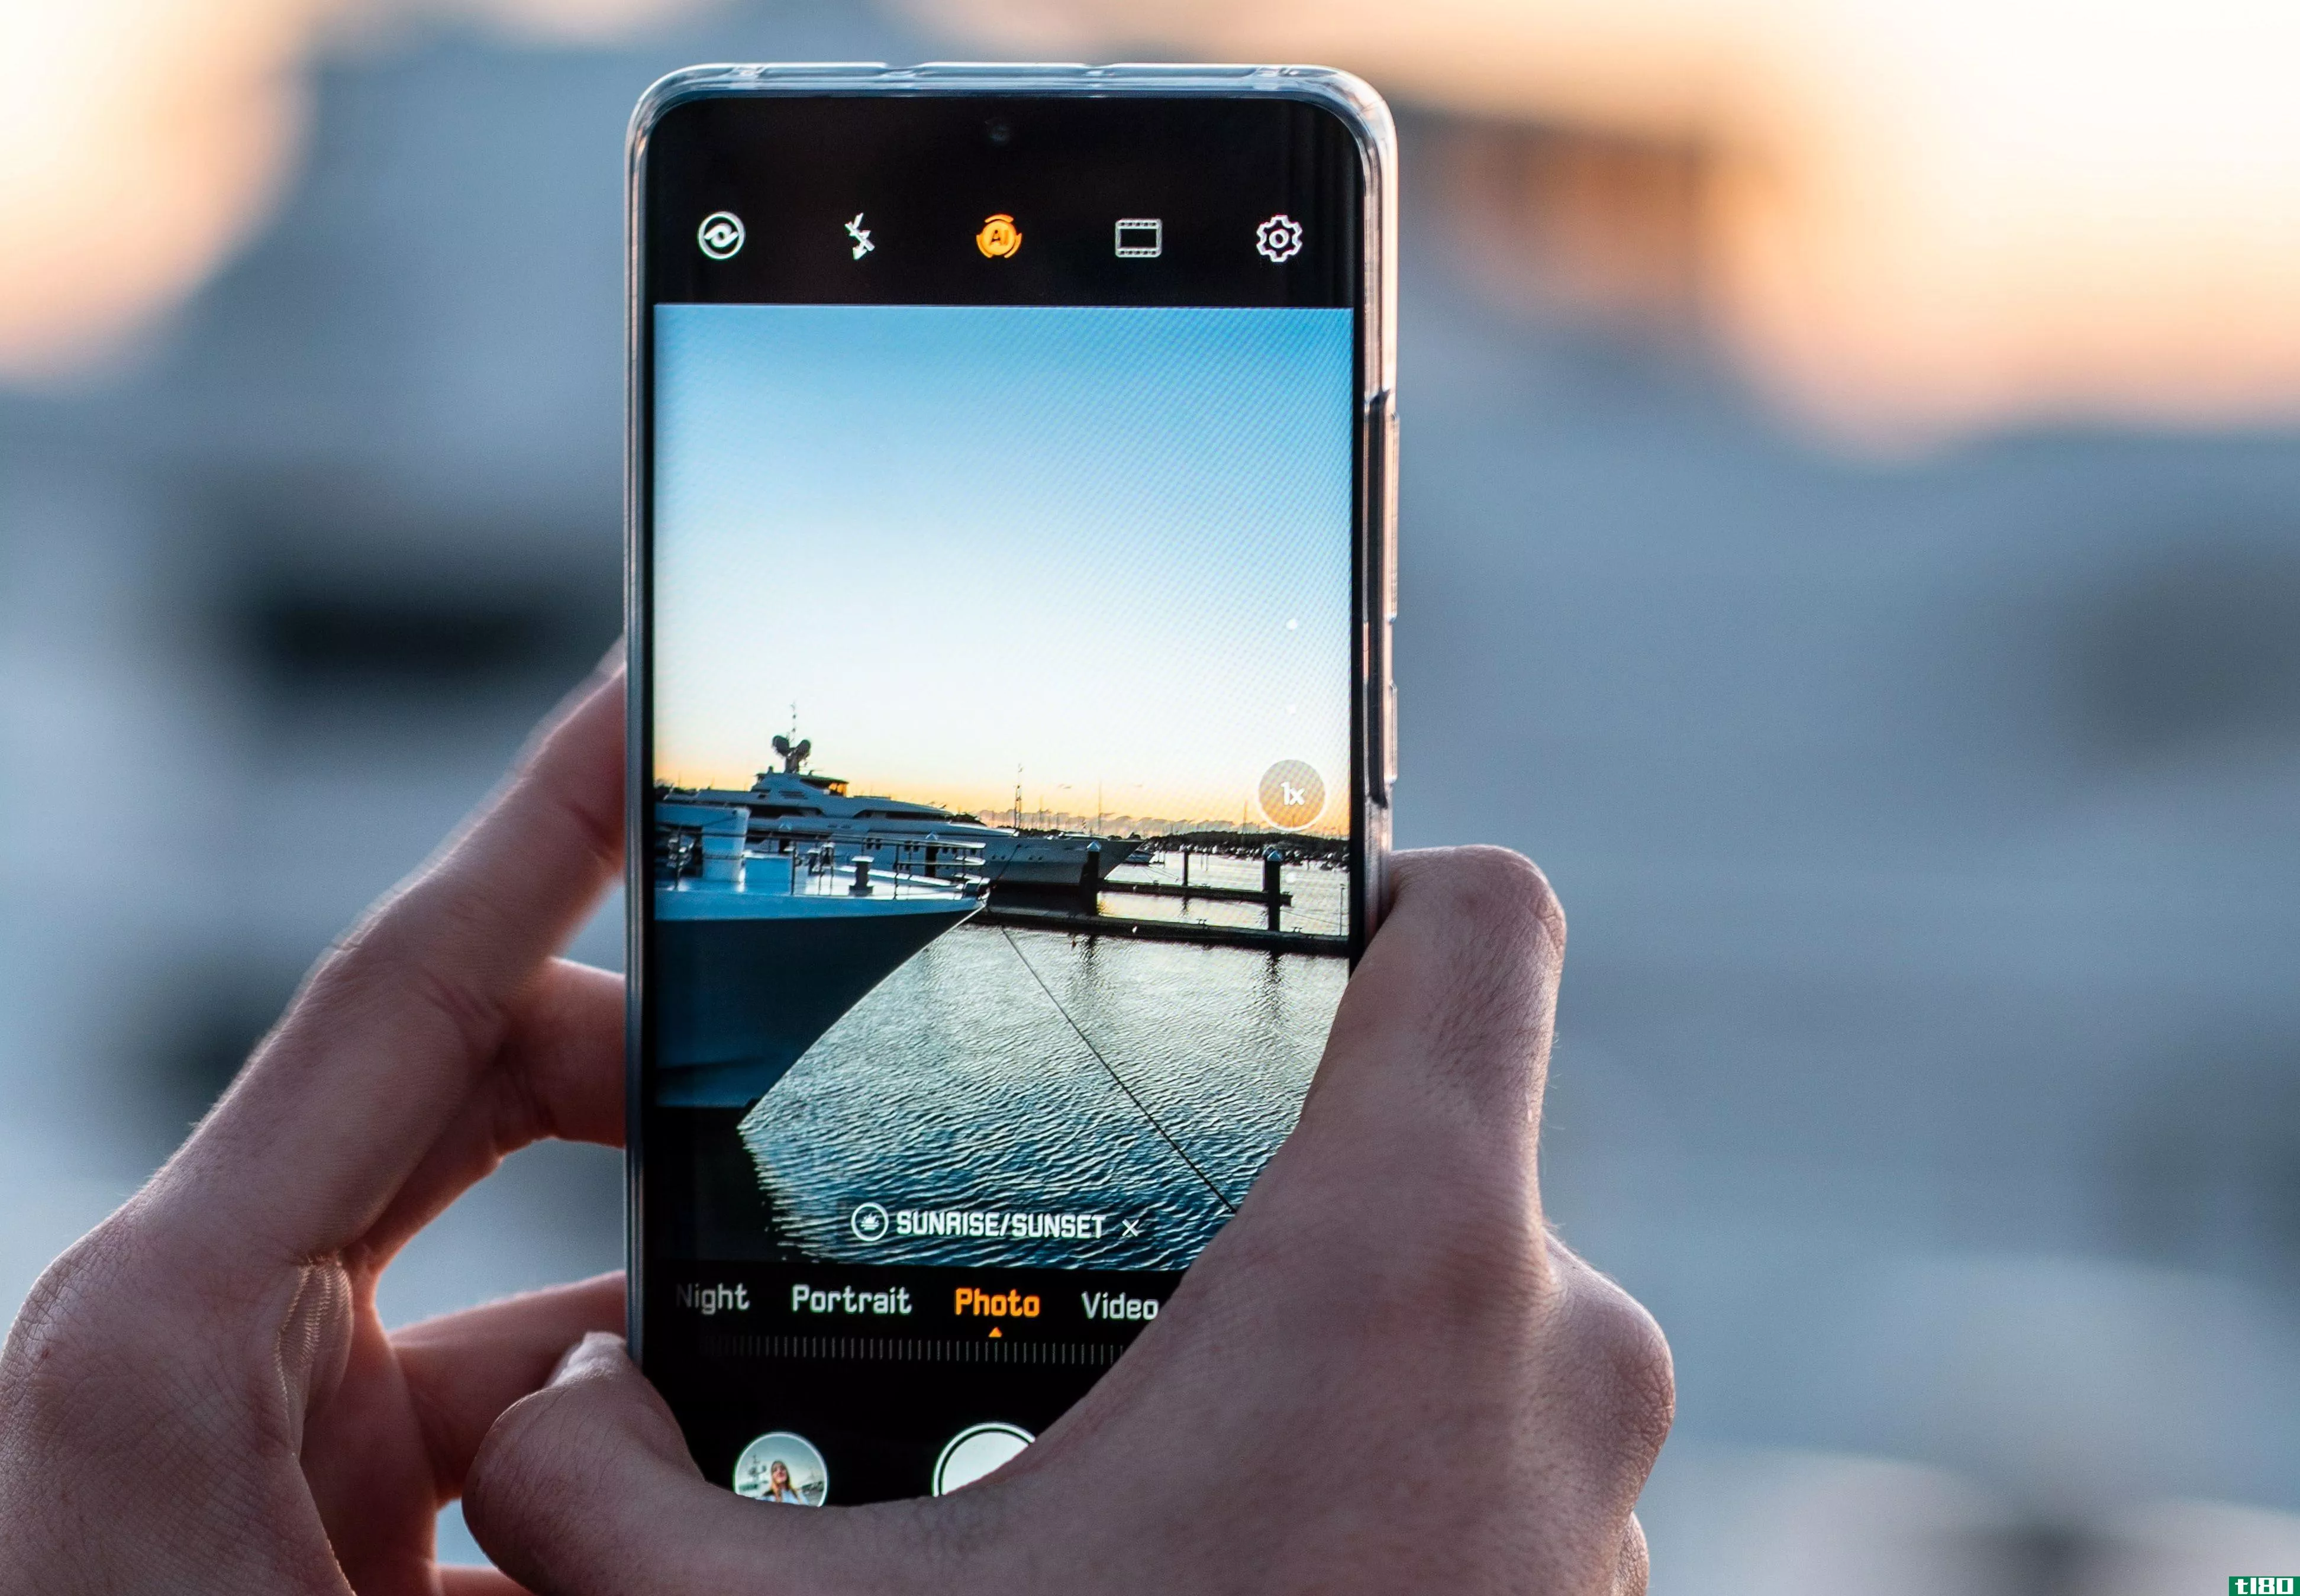 The Huawei P30 Pro being used to take a picture